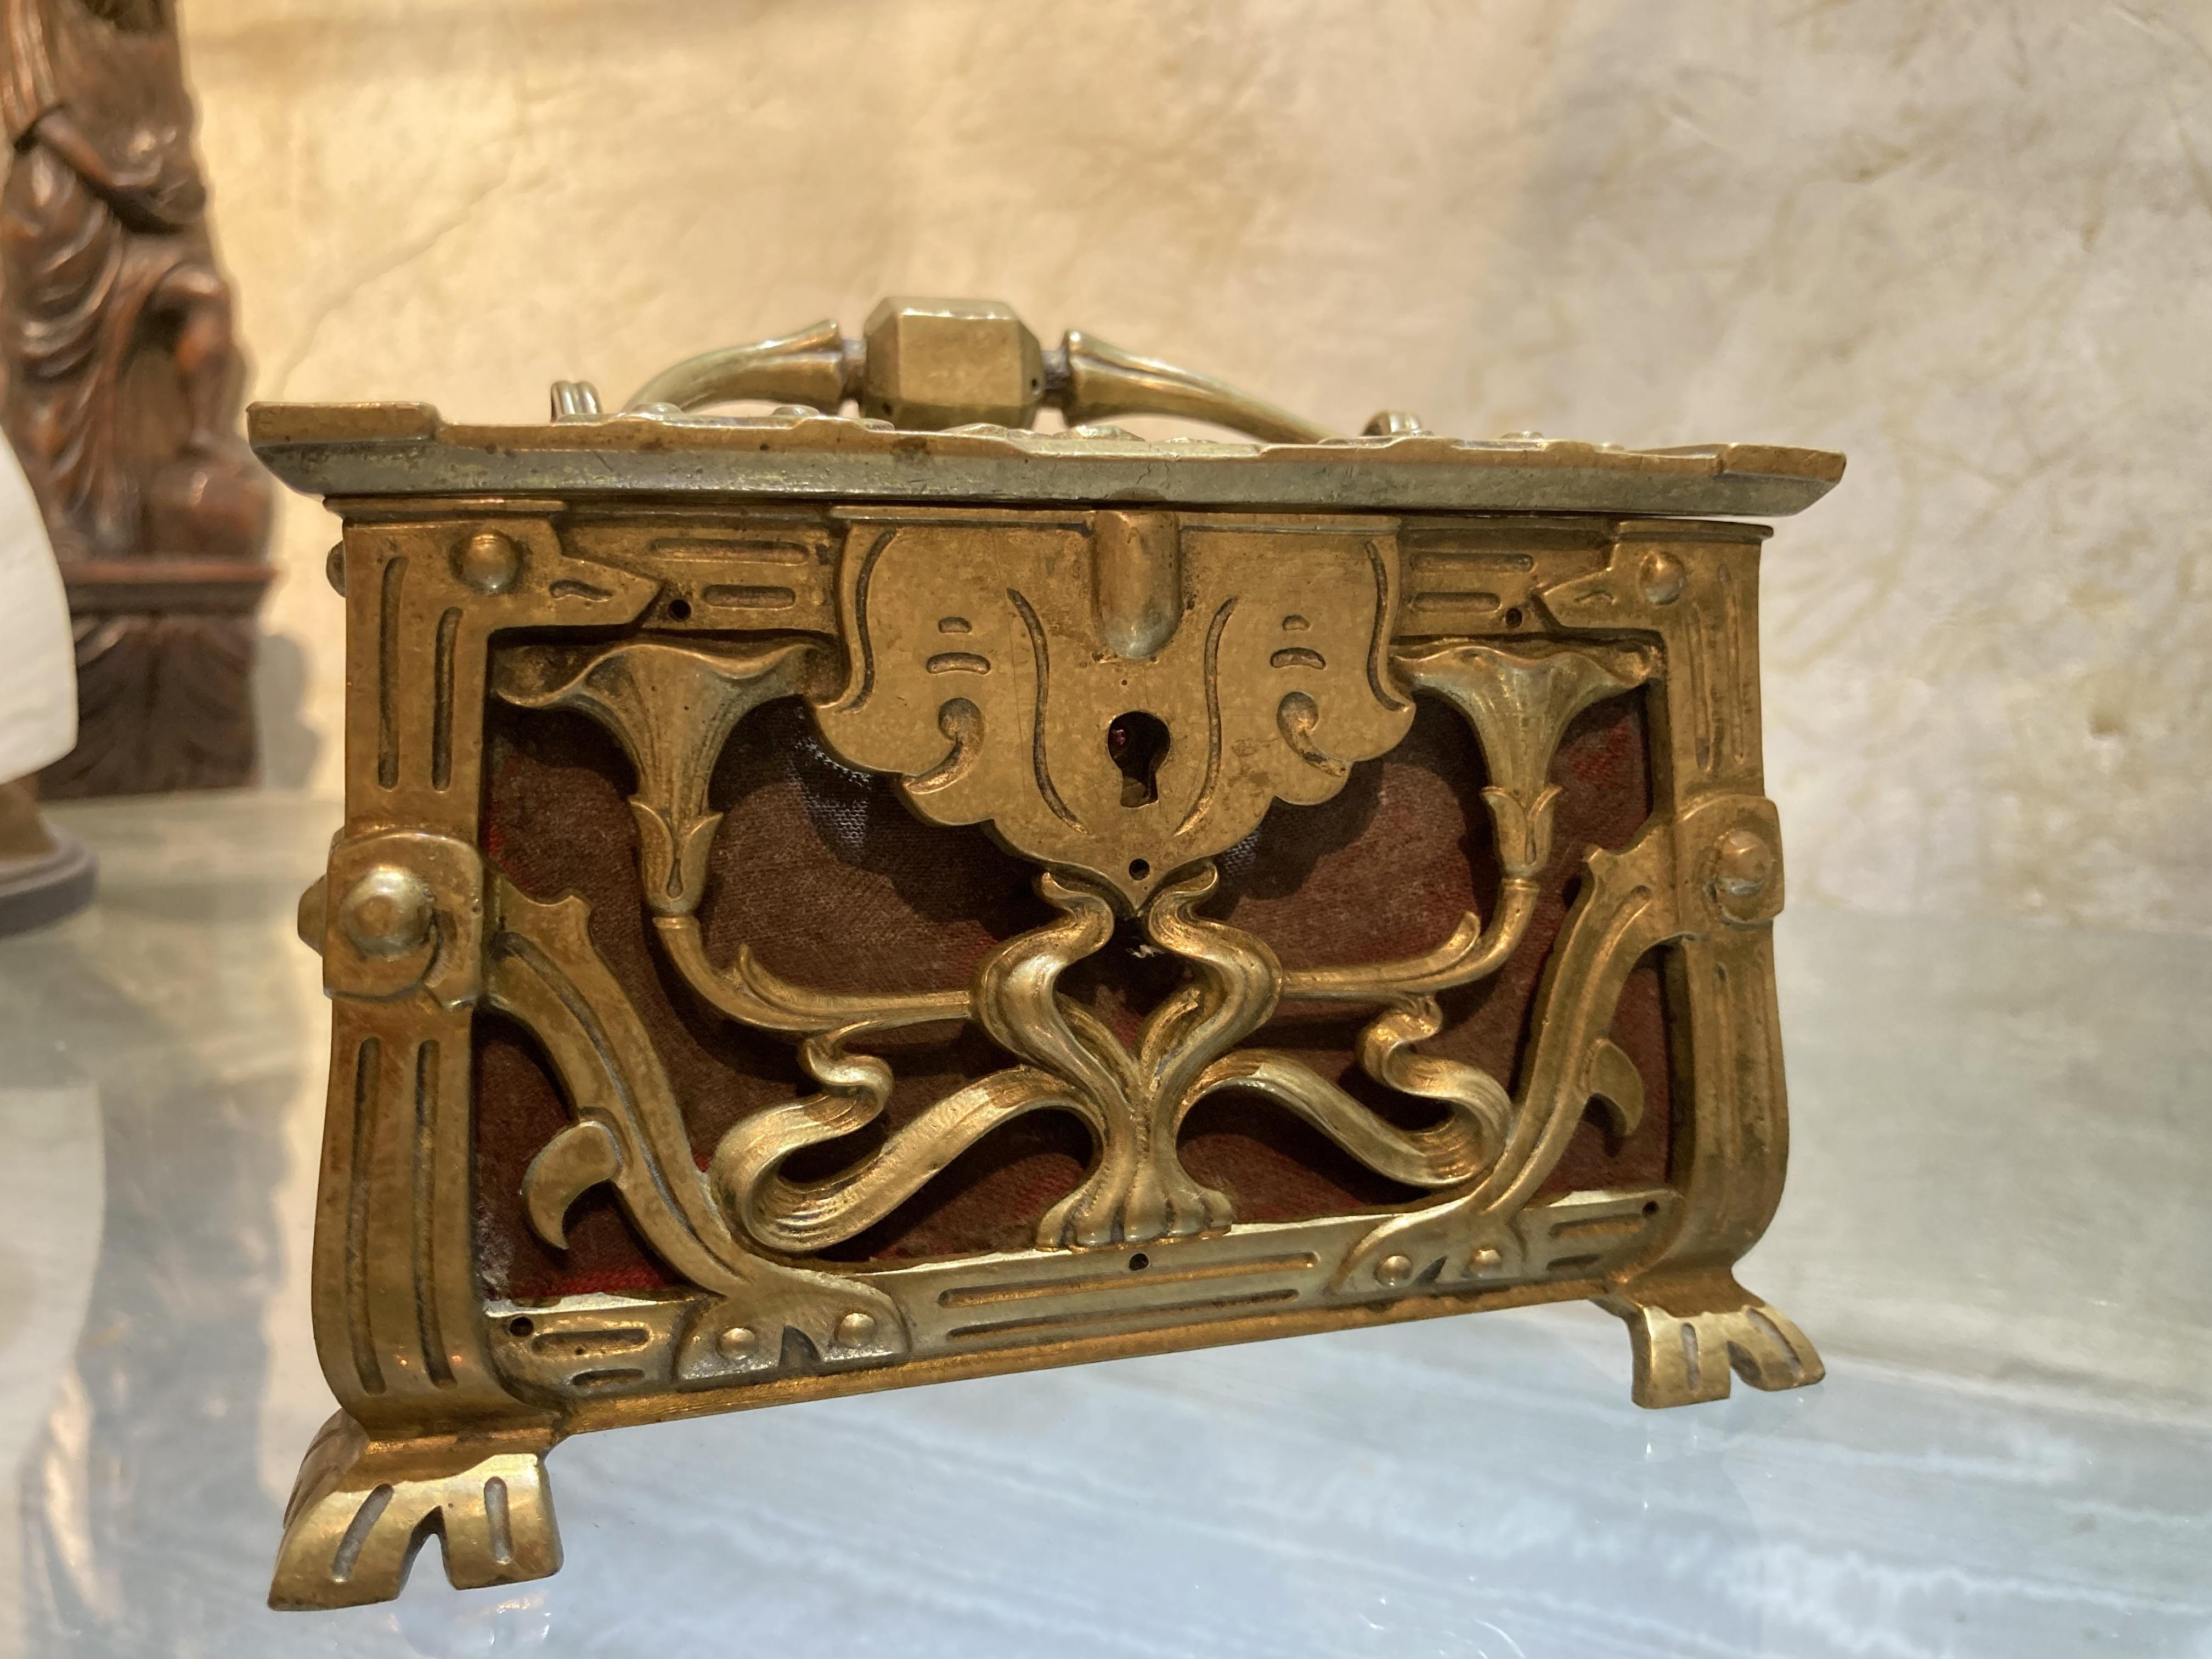 This lavish French Art Nouveau period (1880-1910) jewelry box is entirely chiseled, hammered and pierced with flowers and leaf patterns. This late 19th – early 20th century rectangular shaped casket is quite substantial. The box boasts a beautiful